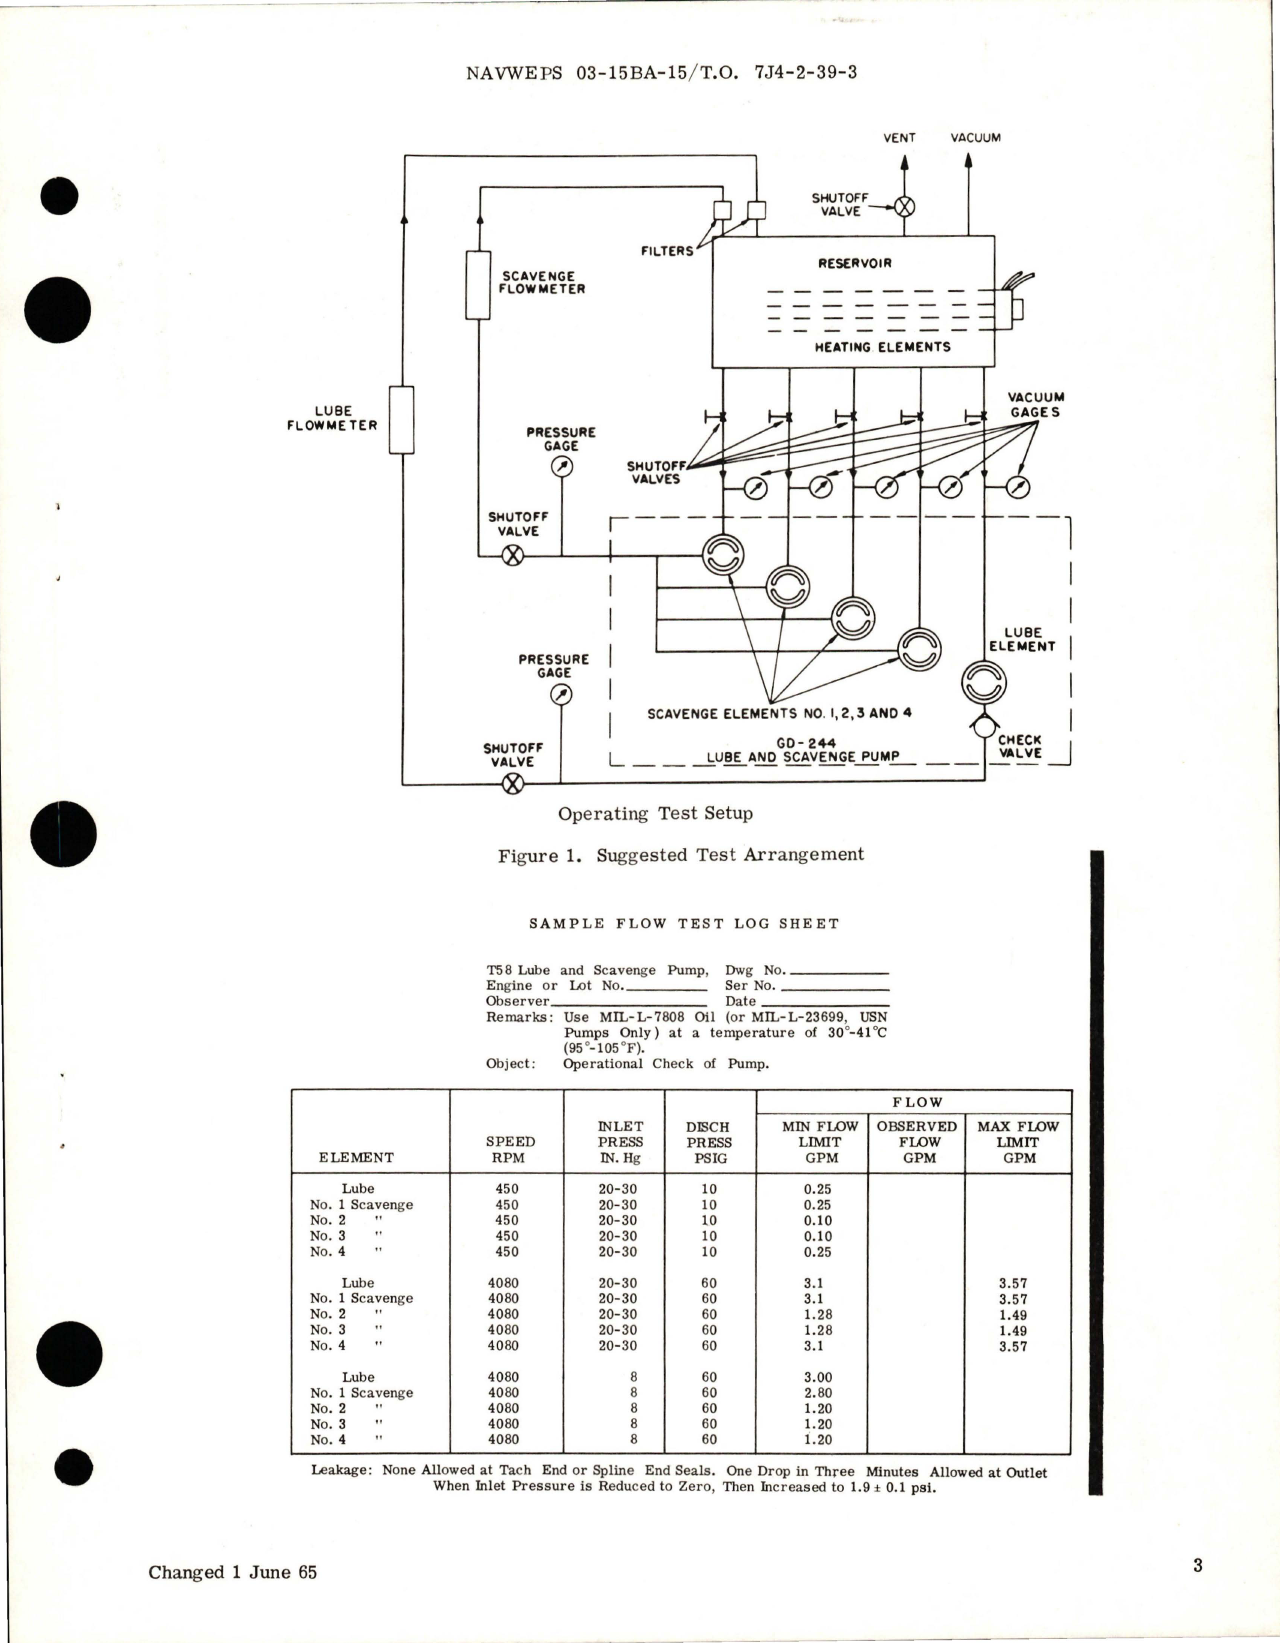 Sample page 5 from AirCorps Library document: Overhaul Instructions with Parts for Lube and Scavenge Pump - Part 4000T98P01 - GD-244